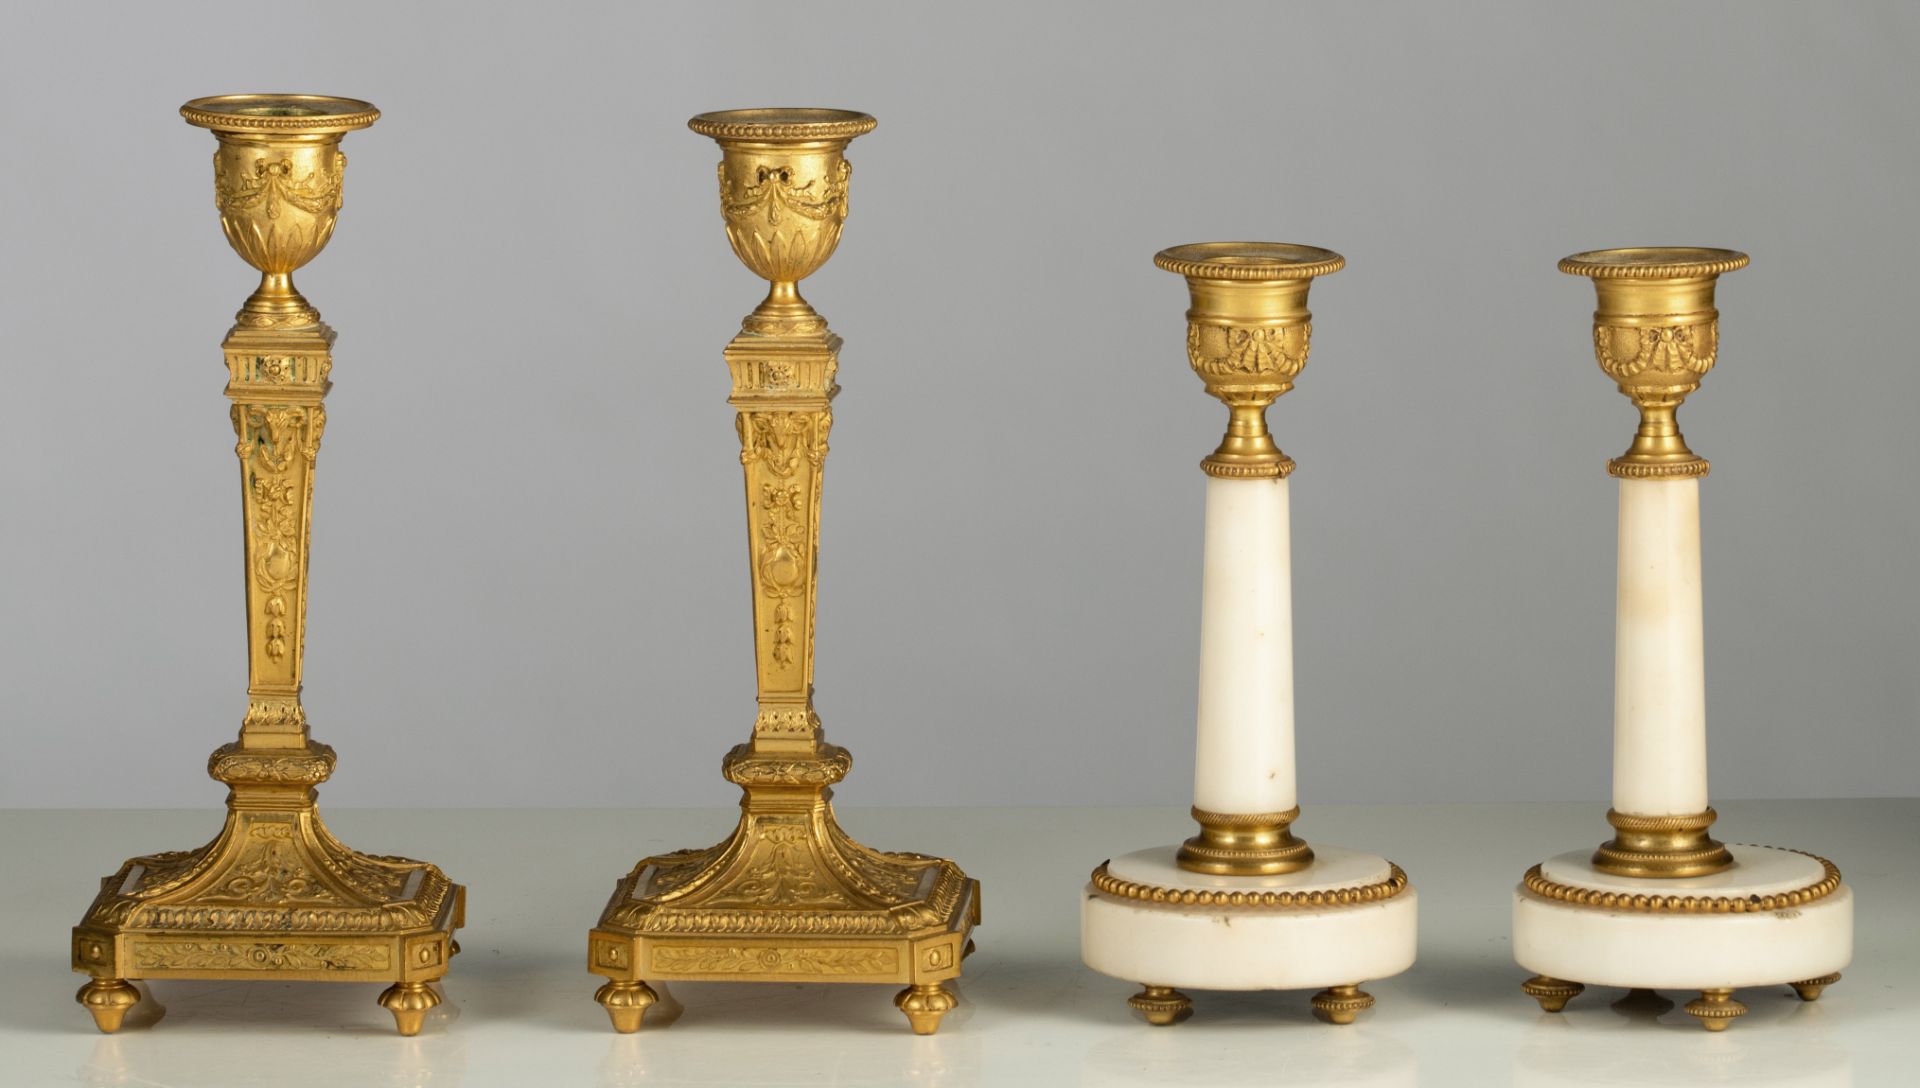 (BIDDING ONLY ON CARLOBONTE.BE) Two pairs of Neoclassical candlesticks, H 17,5 - 21 cm - Image 5 of 8